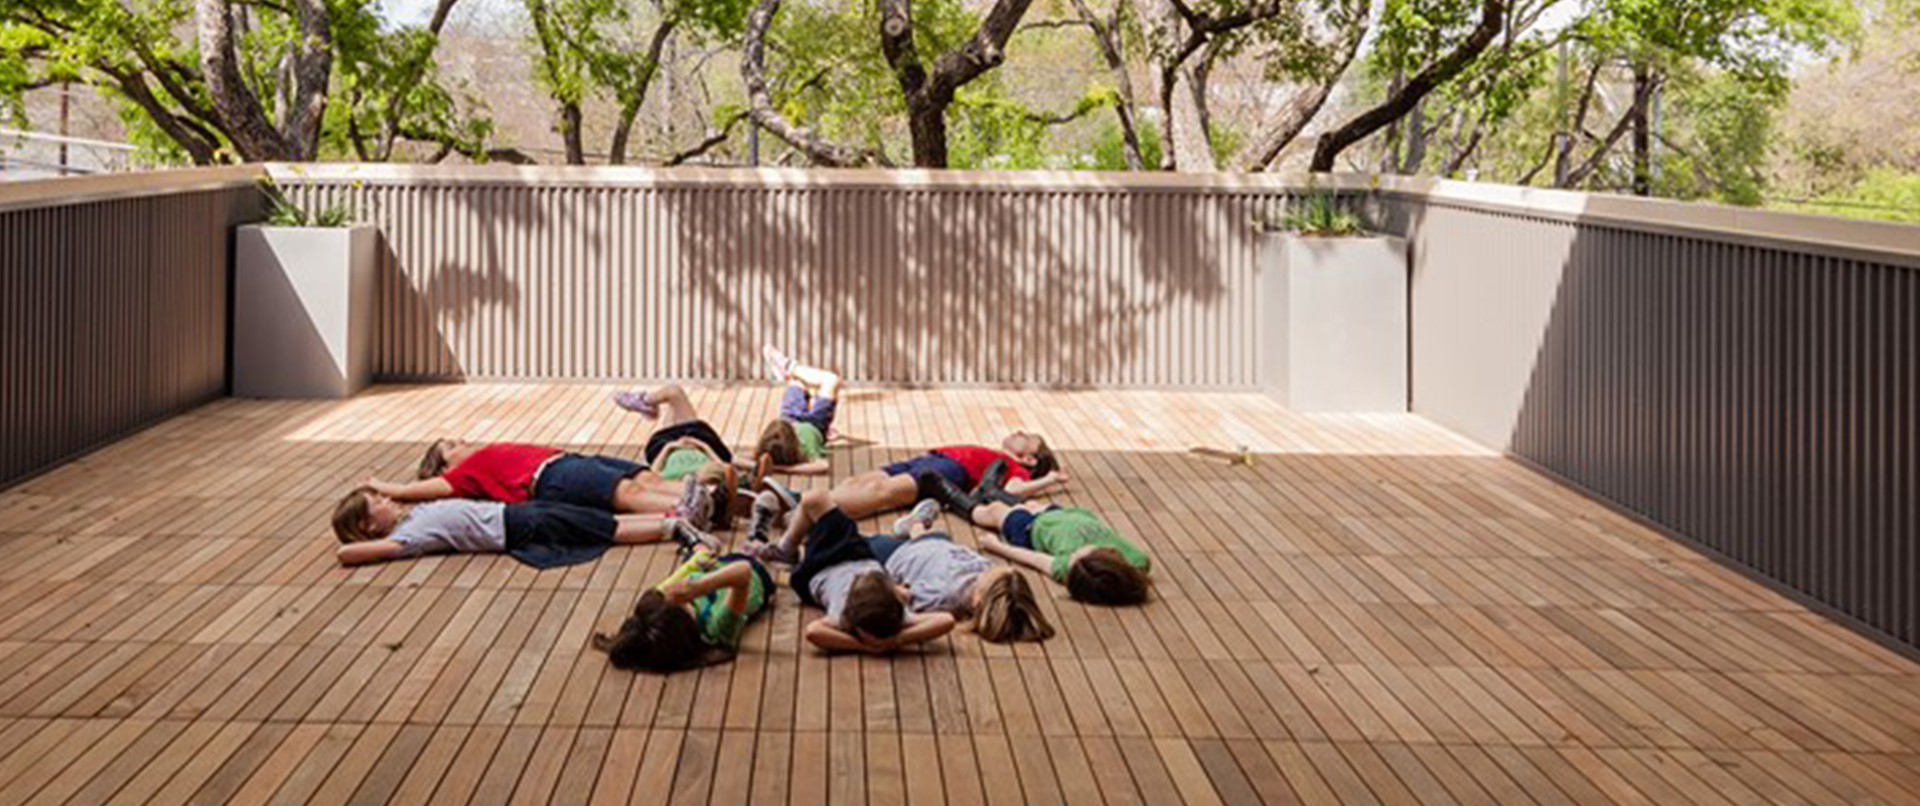 Girls Laying on Outdoor Rooftop Deck